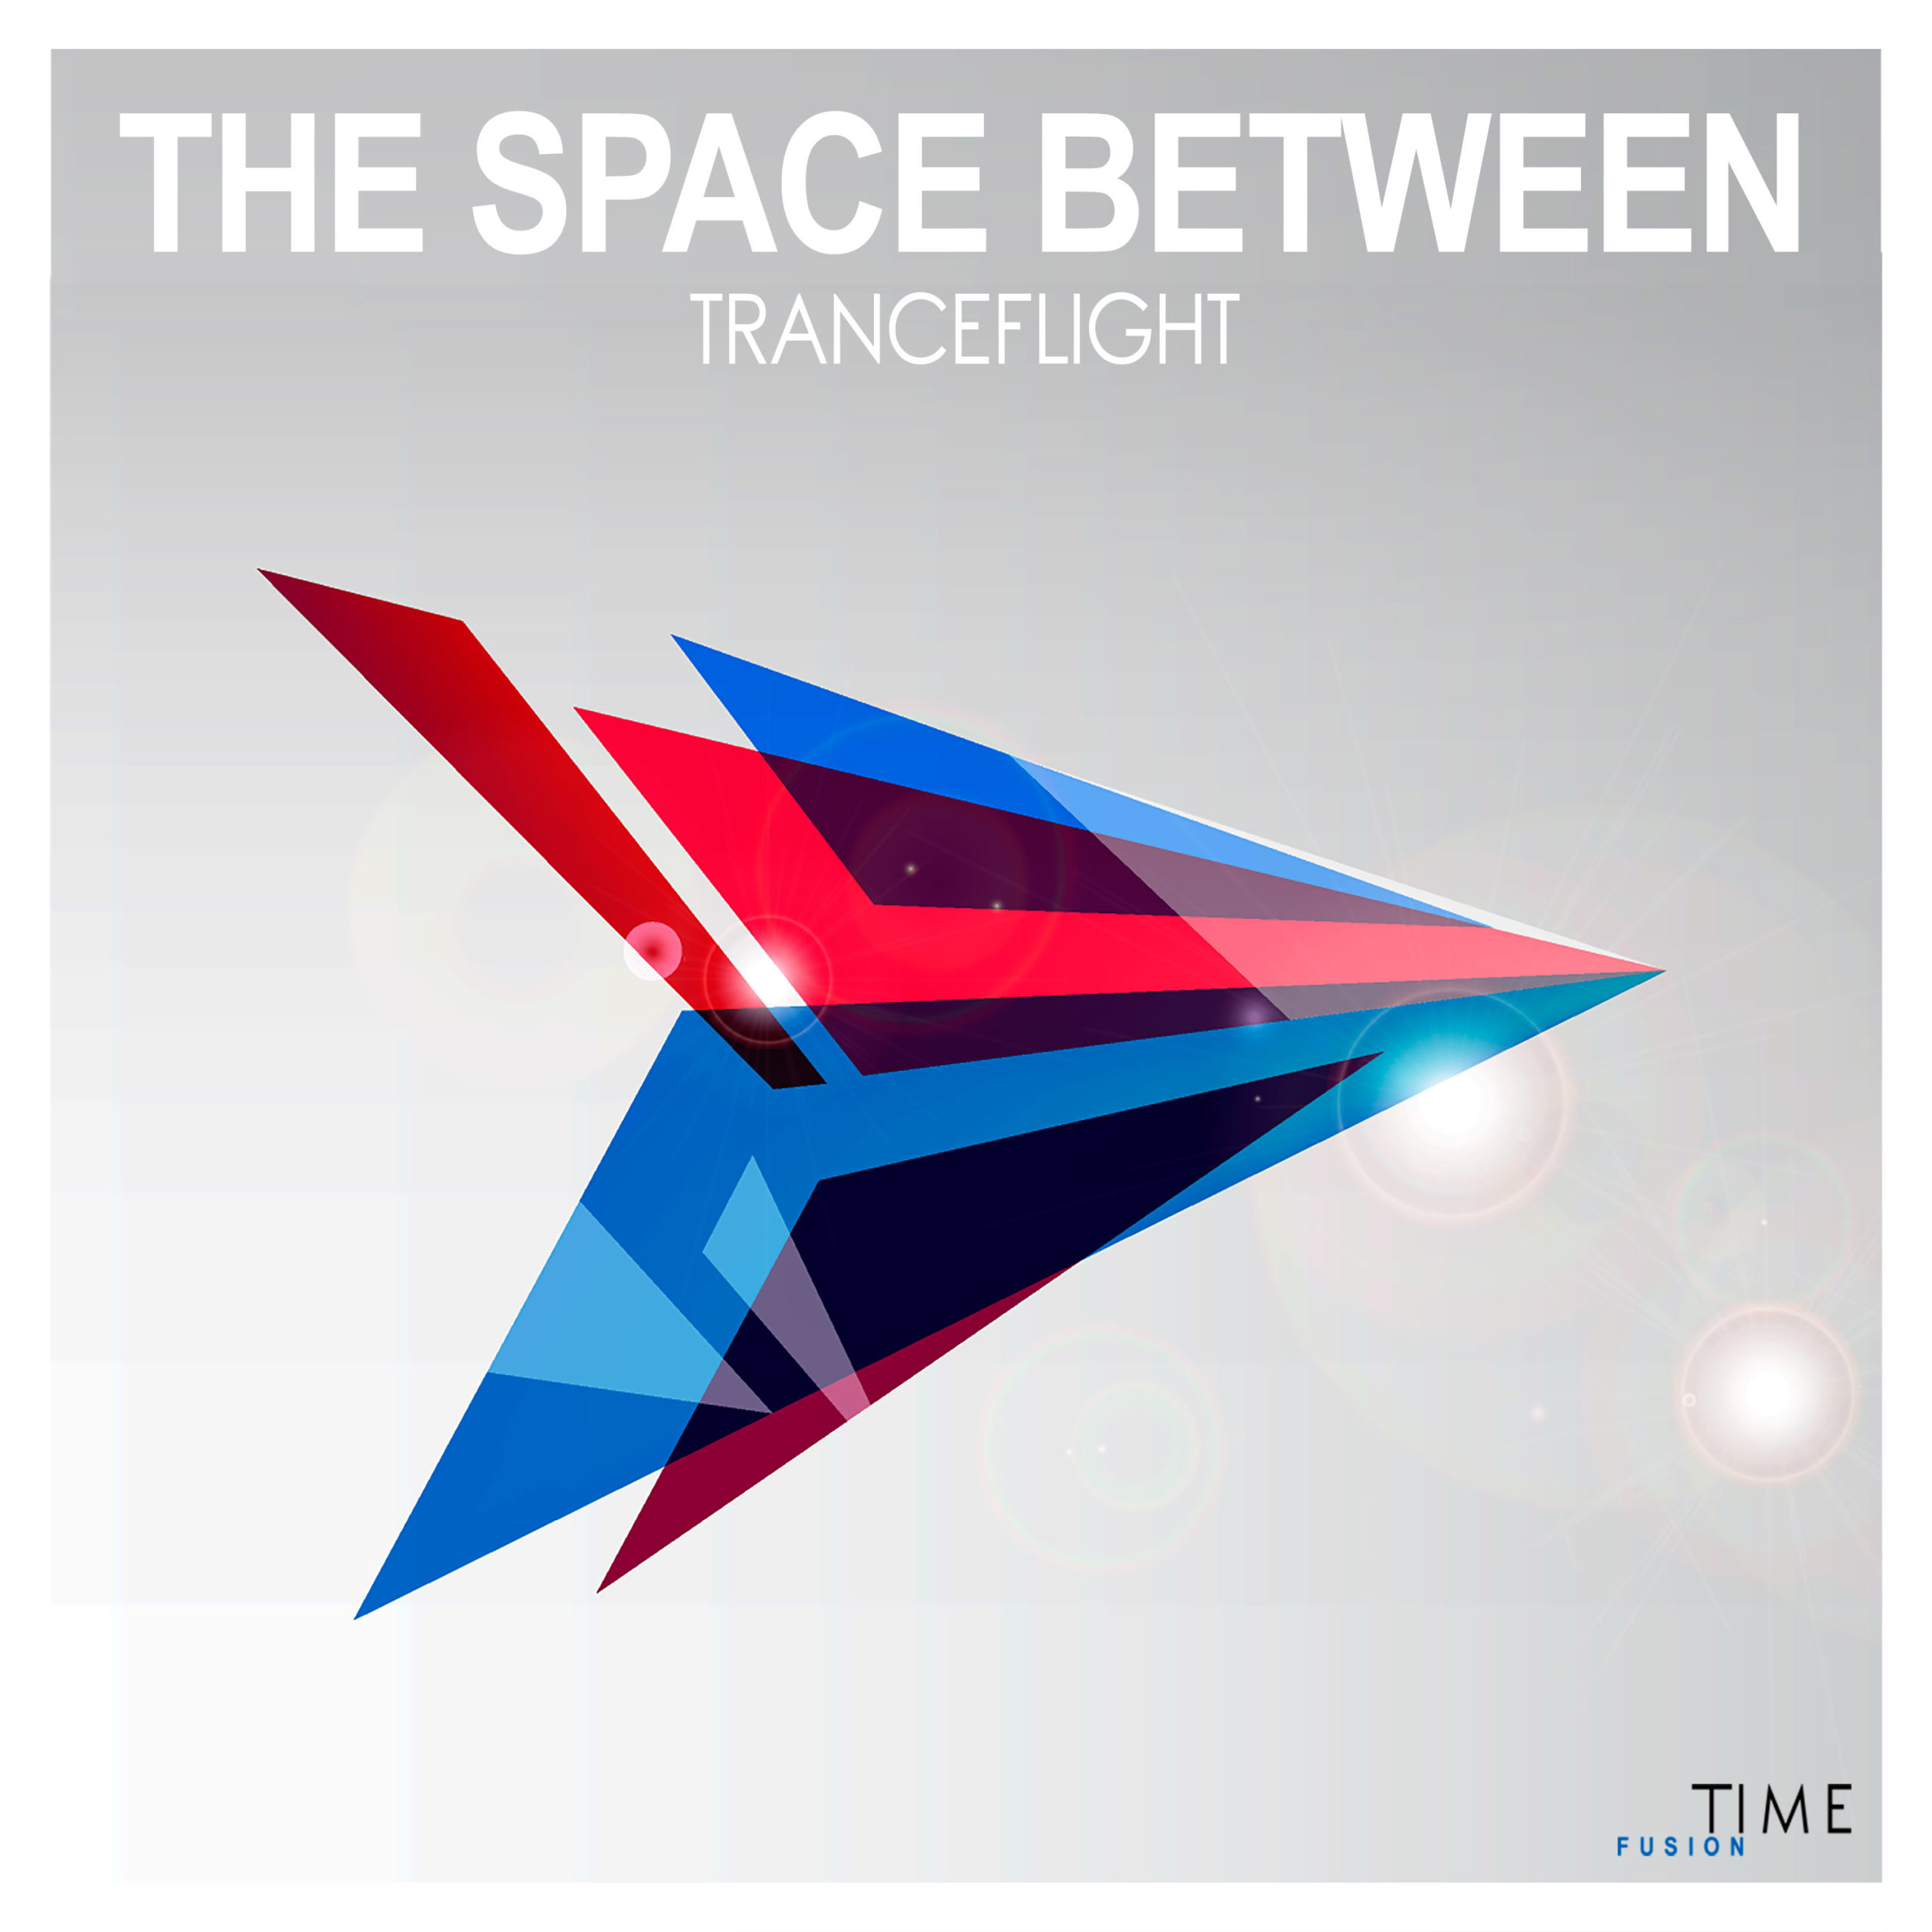 https://www.ultimate-house-records.com/wp-content/uploads/2022/01/tf149-The_Space_Between_Cover-3000px_web-scaled.jpg